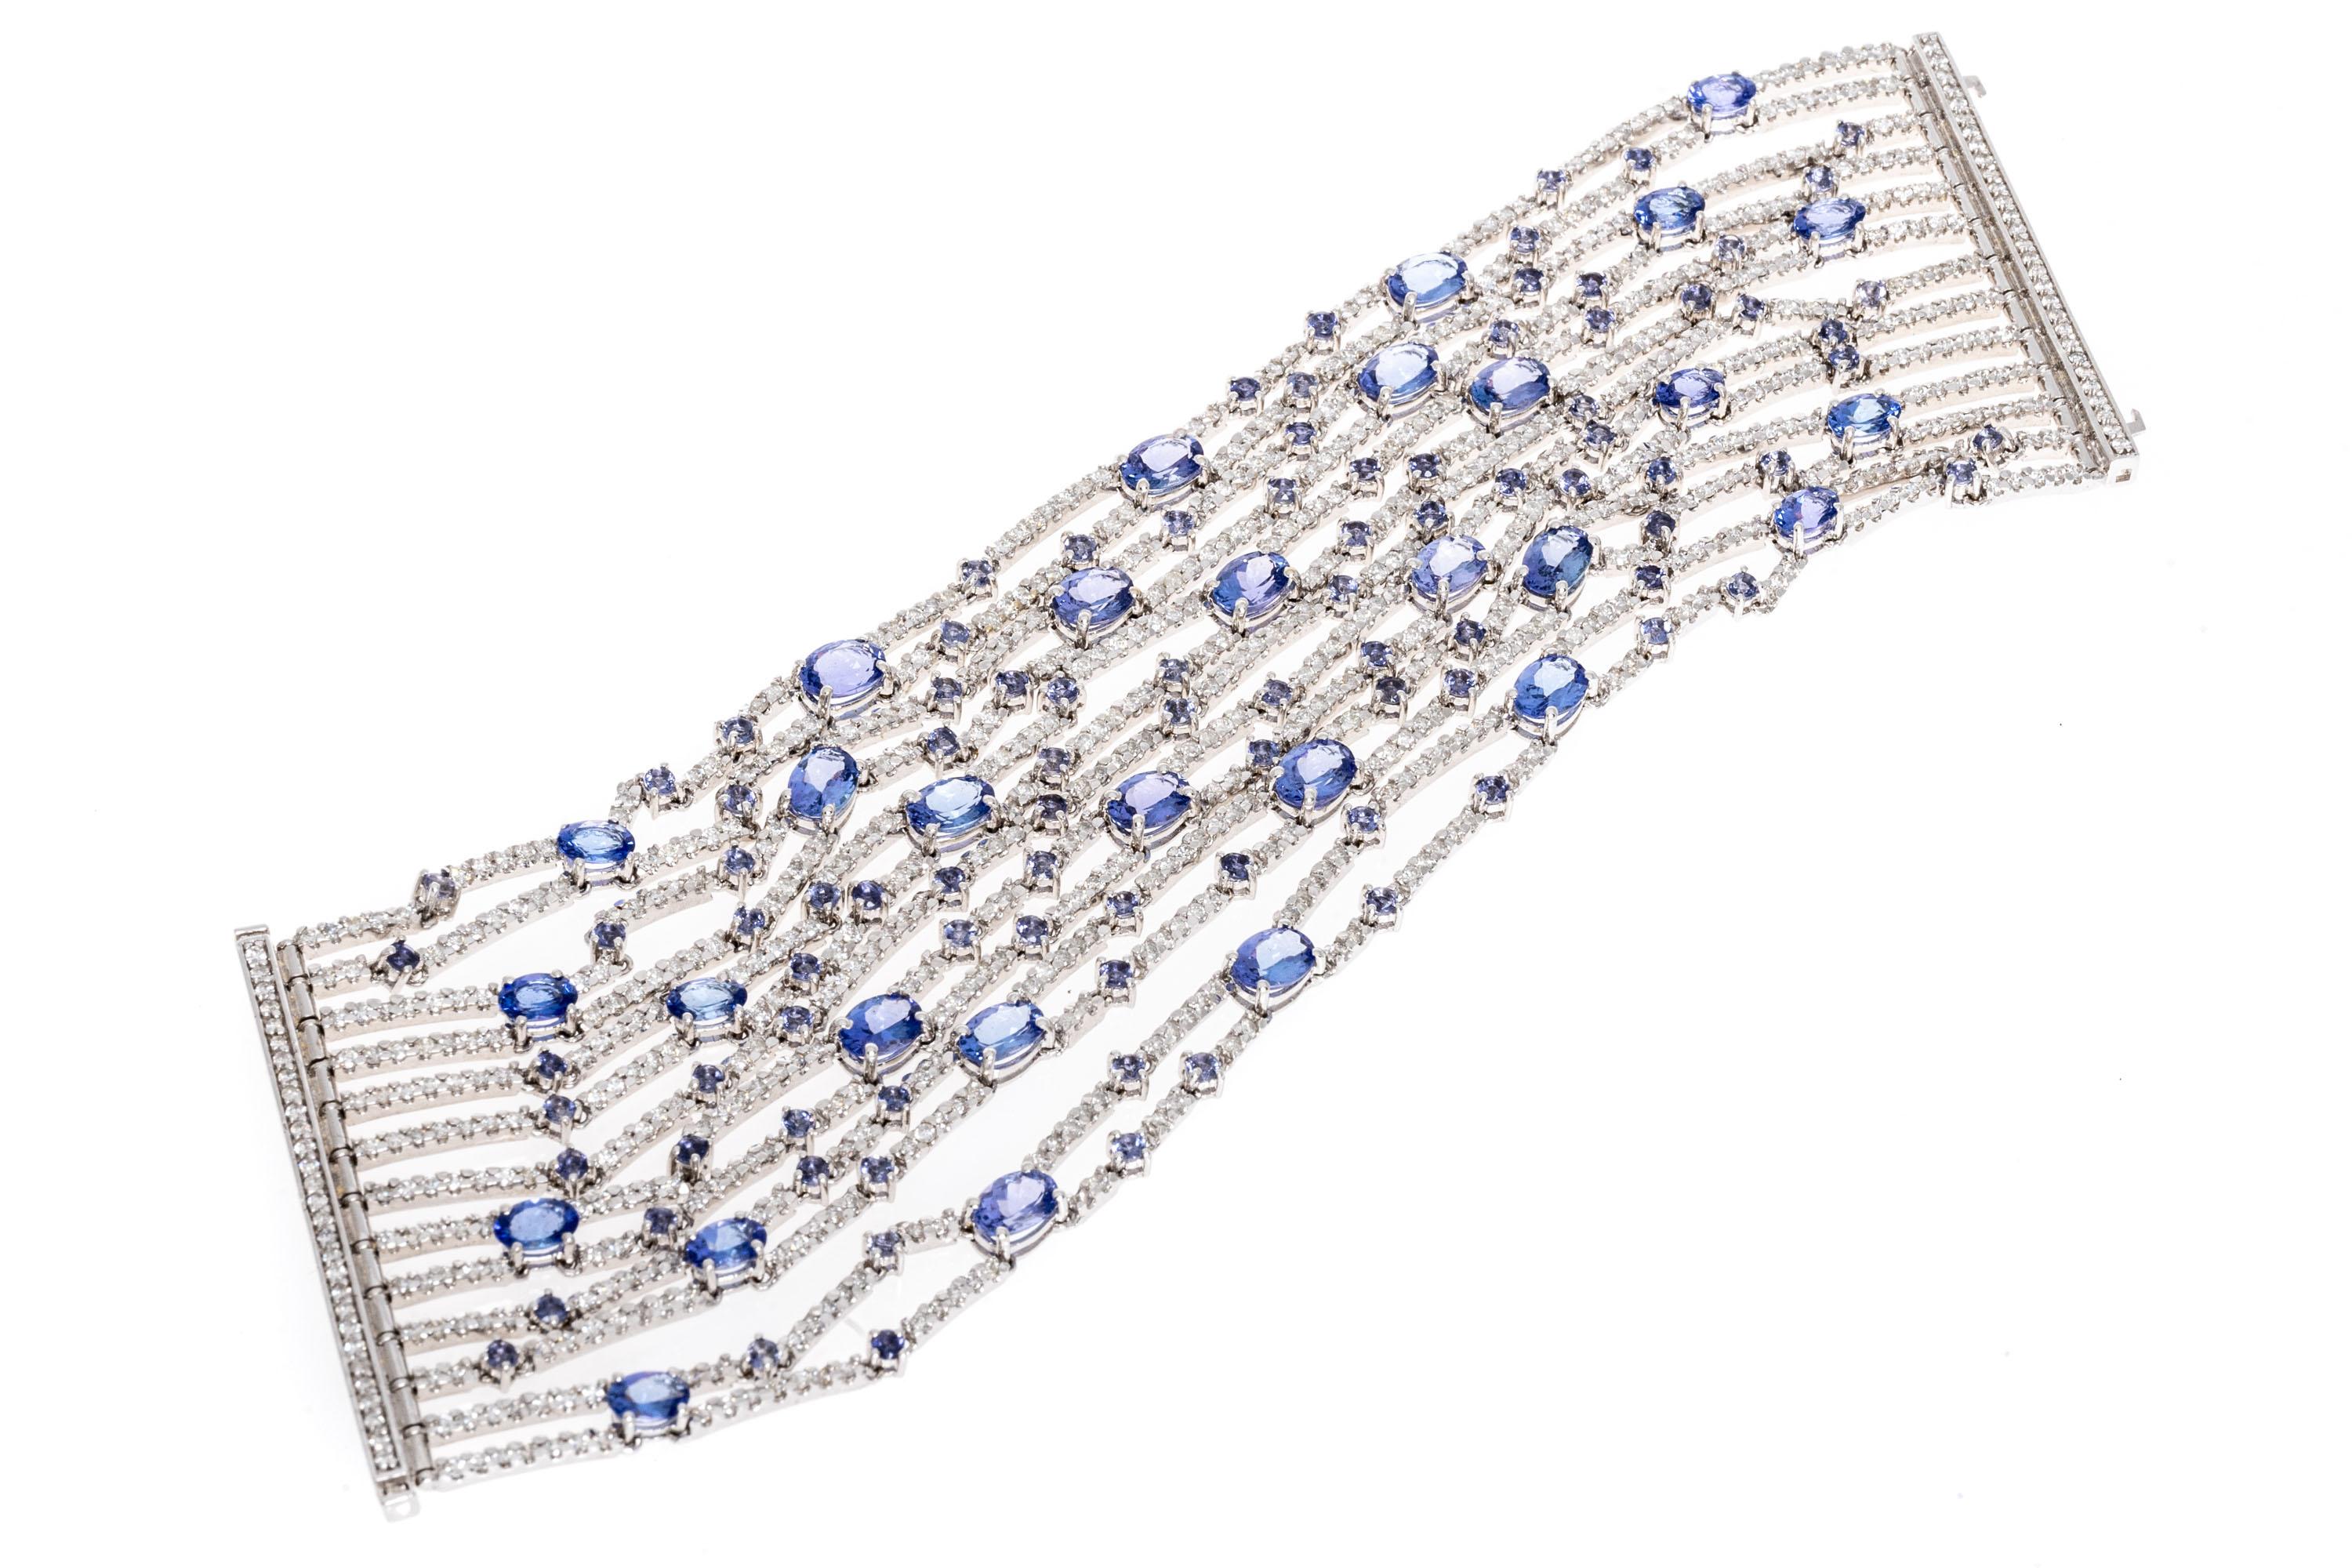 18k white gold bracelet. This absolutely spectacular bracelet is a flexible, multi-row line style, encompassing tanzanite and diamonds. 
The tanzanite stones are comprised of several variations. Starting with the small round faceted stones, they are